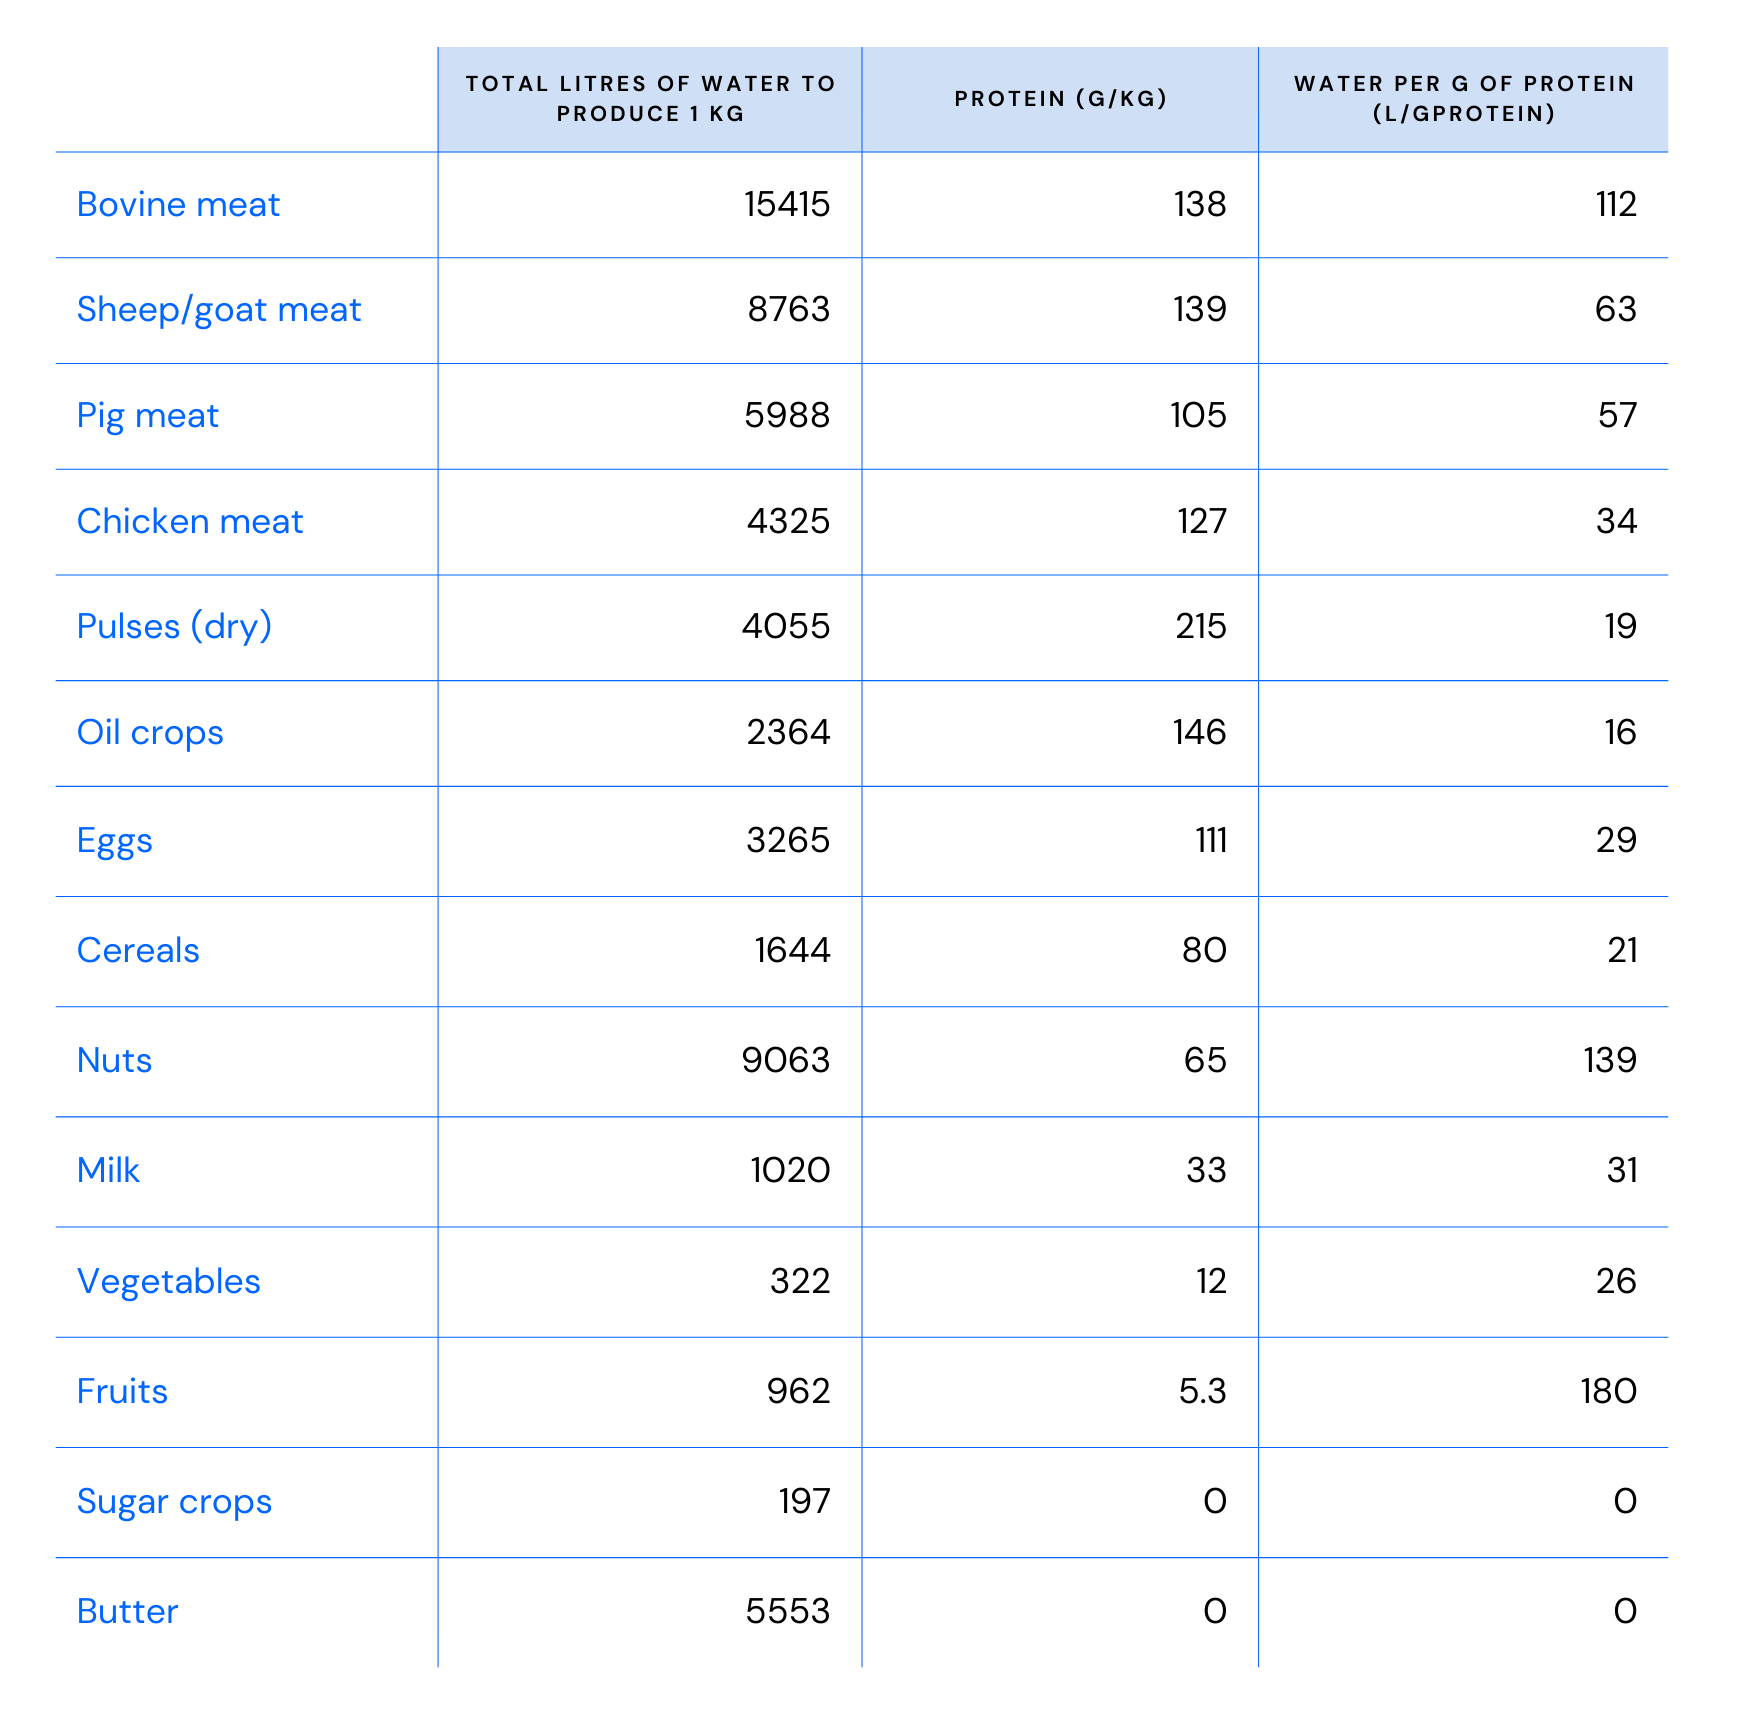 Table of food’s protein content and water footprint